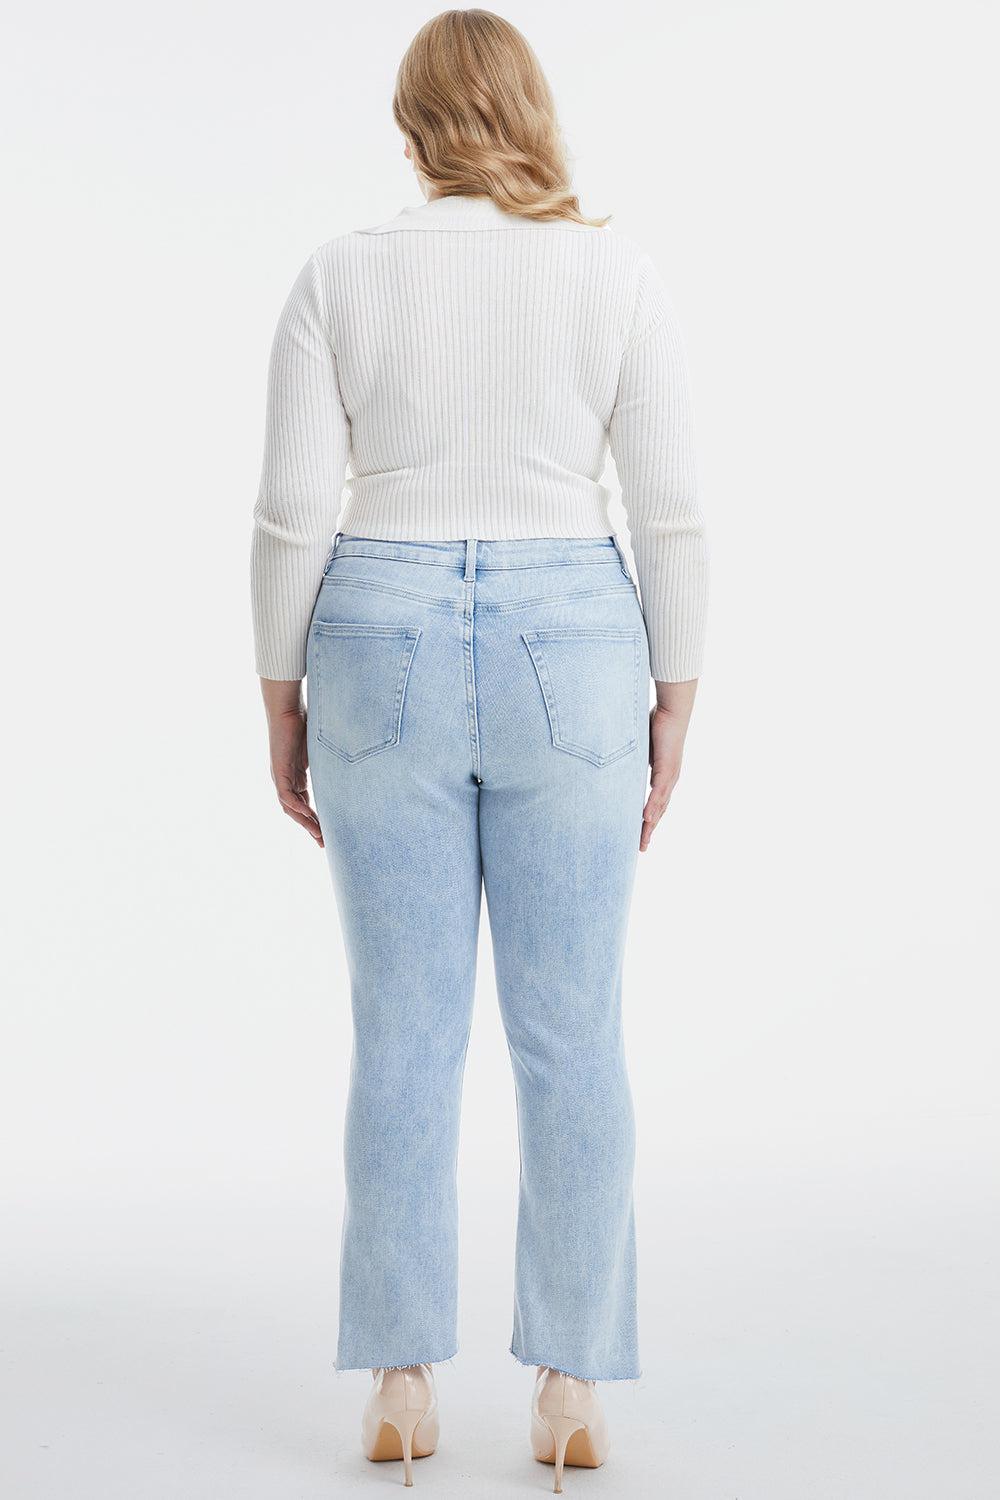 a woman in a white sweater and light blue jeans